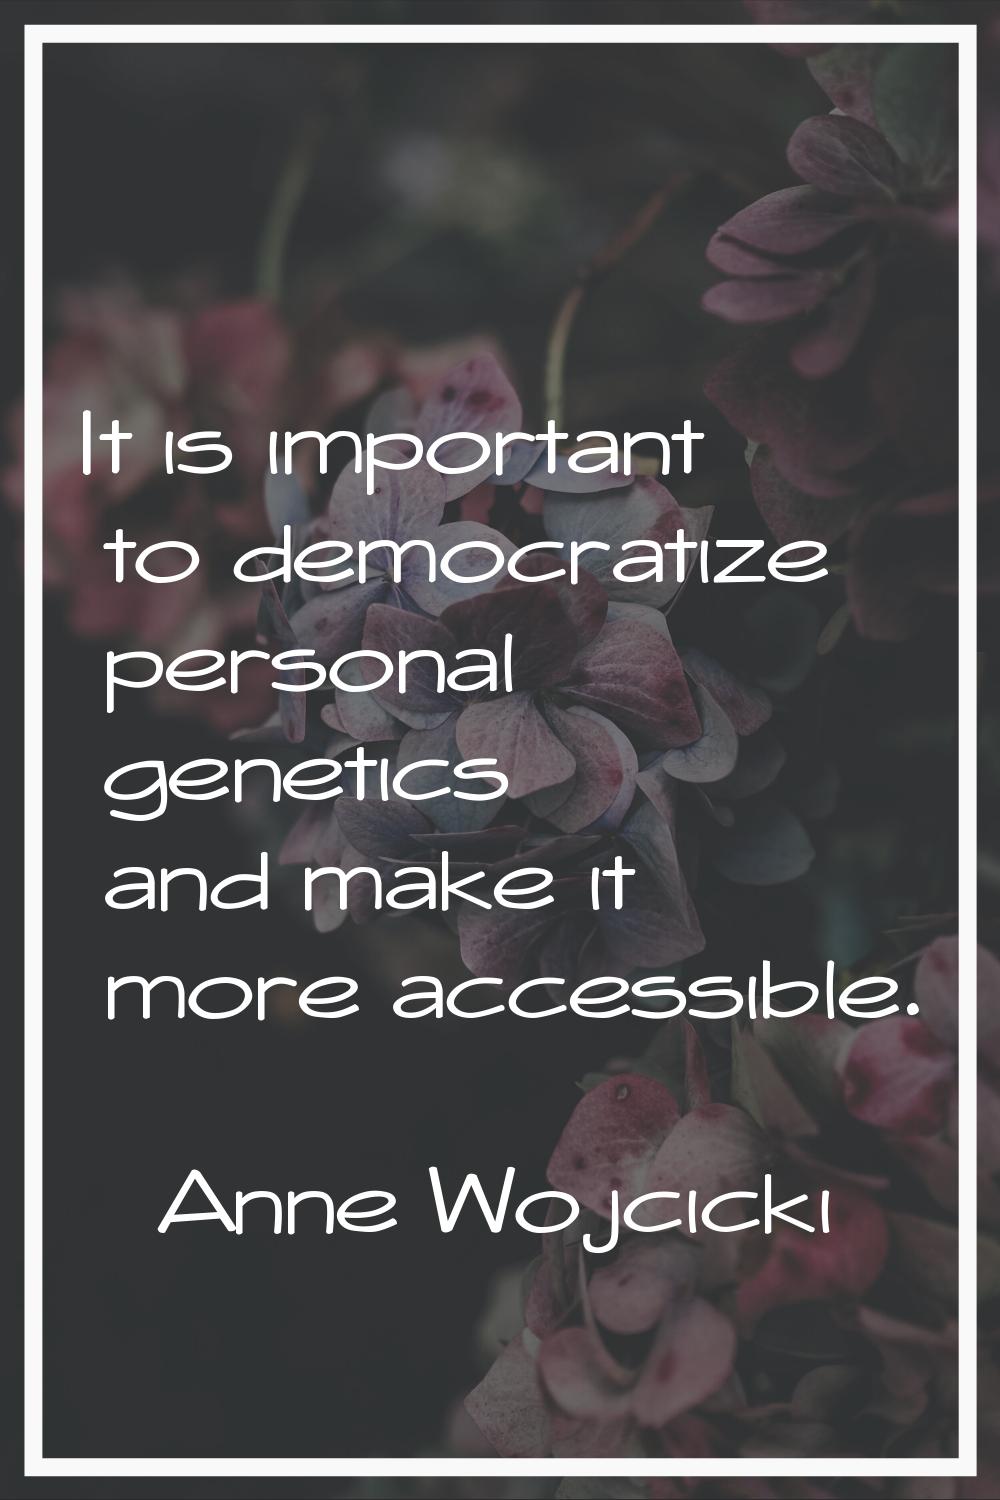 It is important to democratize personal genetics and make it more accessible.